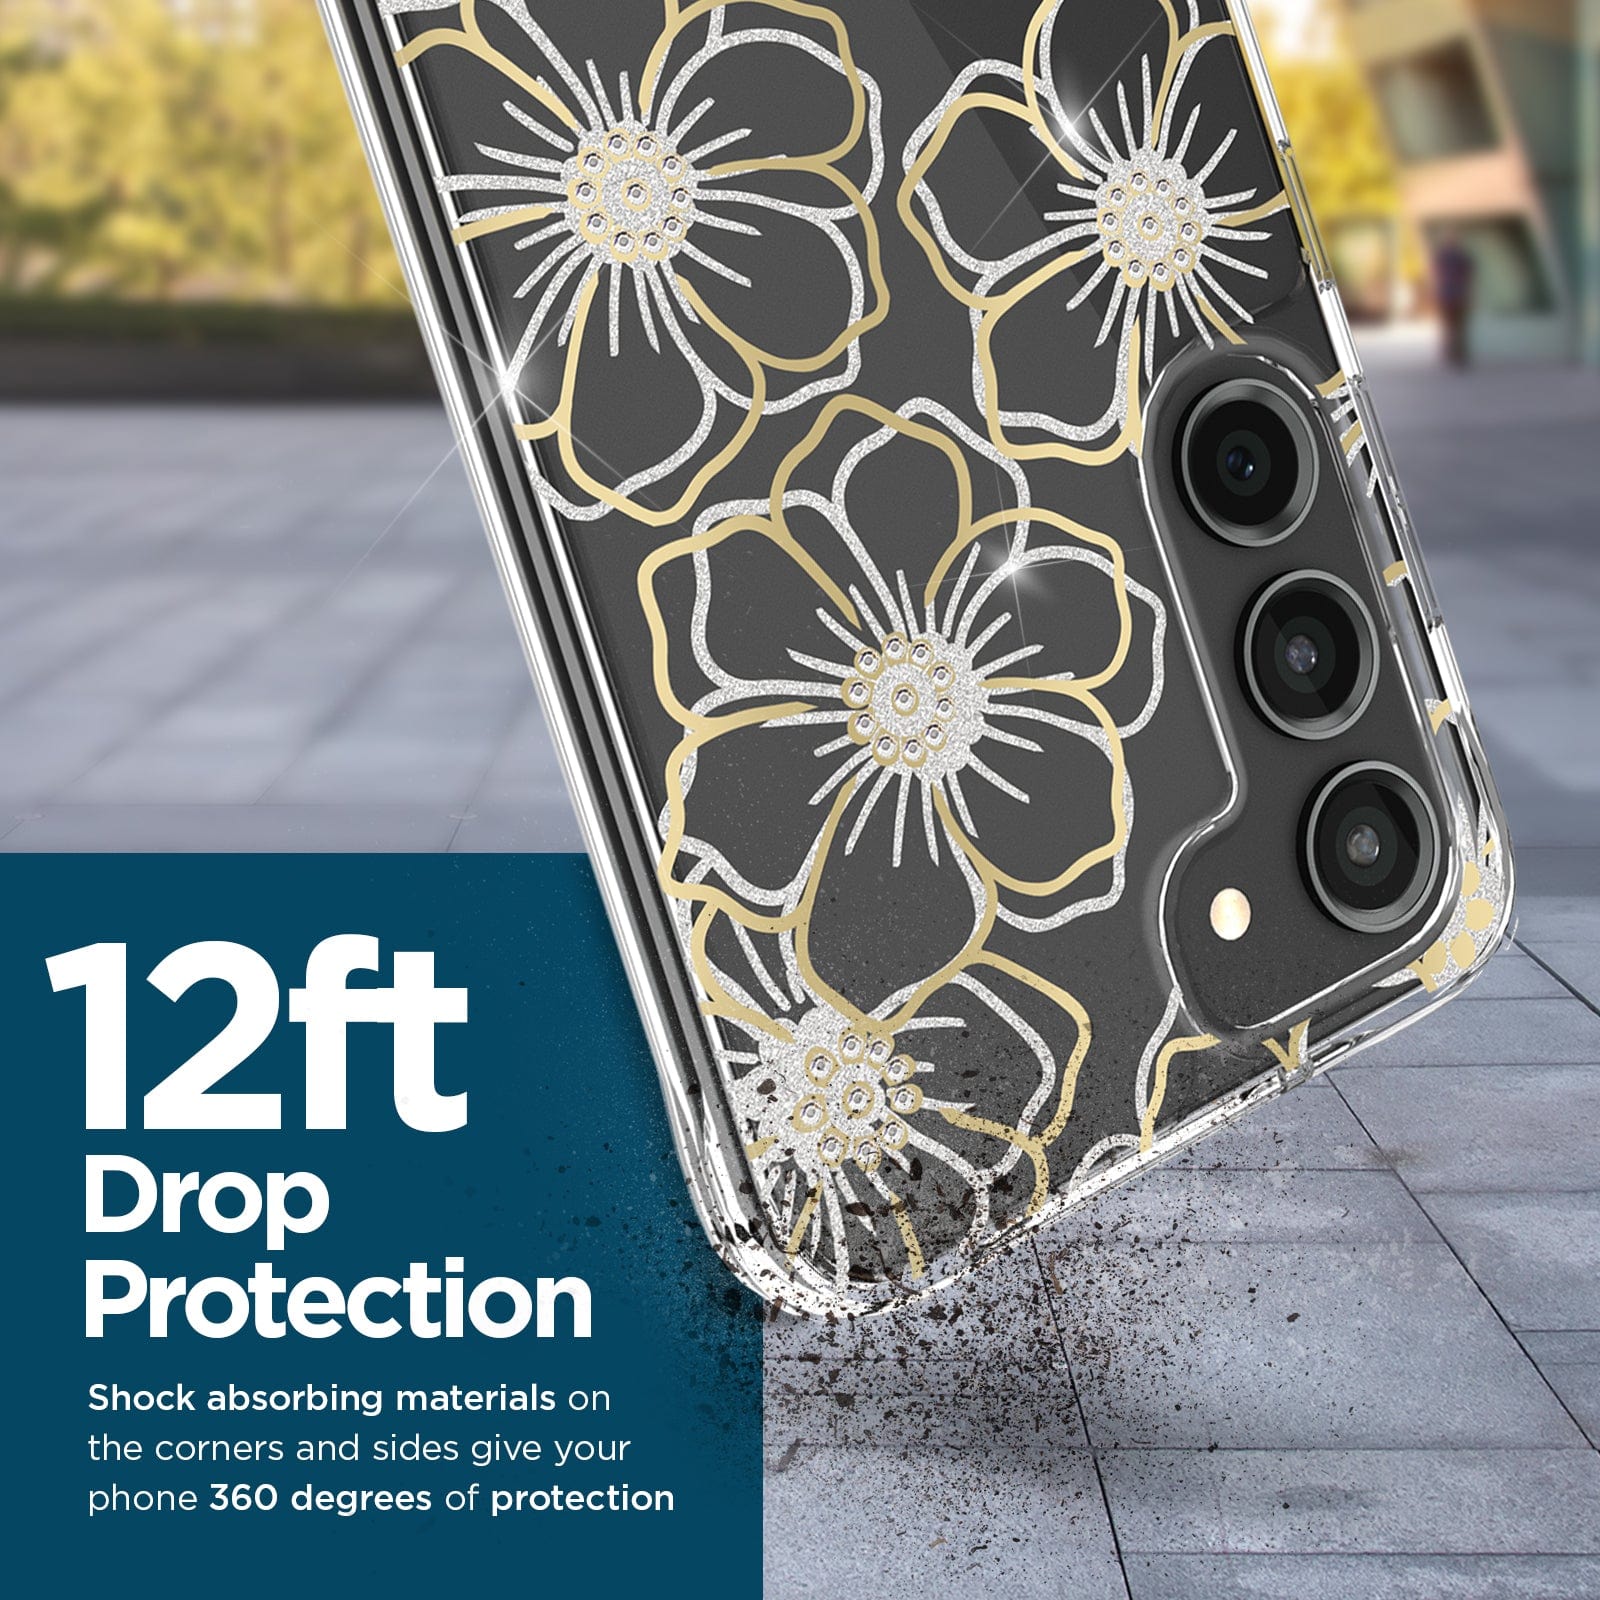 12FT DROP PROTECTION. SHOCK ABSORBING MATERIALS ON THE CORNERS AND SIDES GIVE YOUR PHONE 360 DEGREE PROTECTION